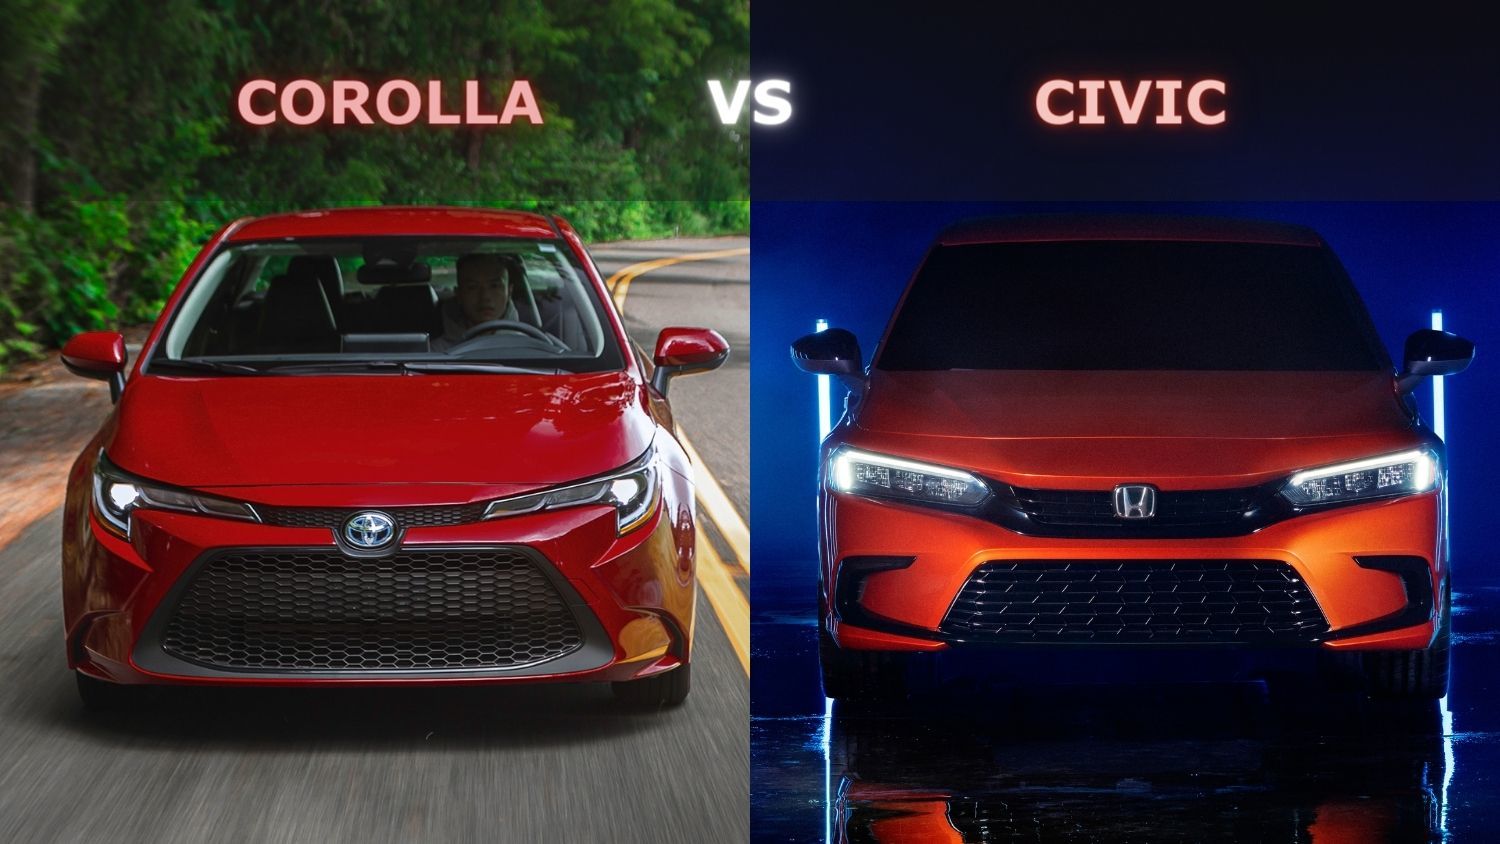 Front view of the red 2022 Toyota Corolla vs the orange 2022 Honda Civic